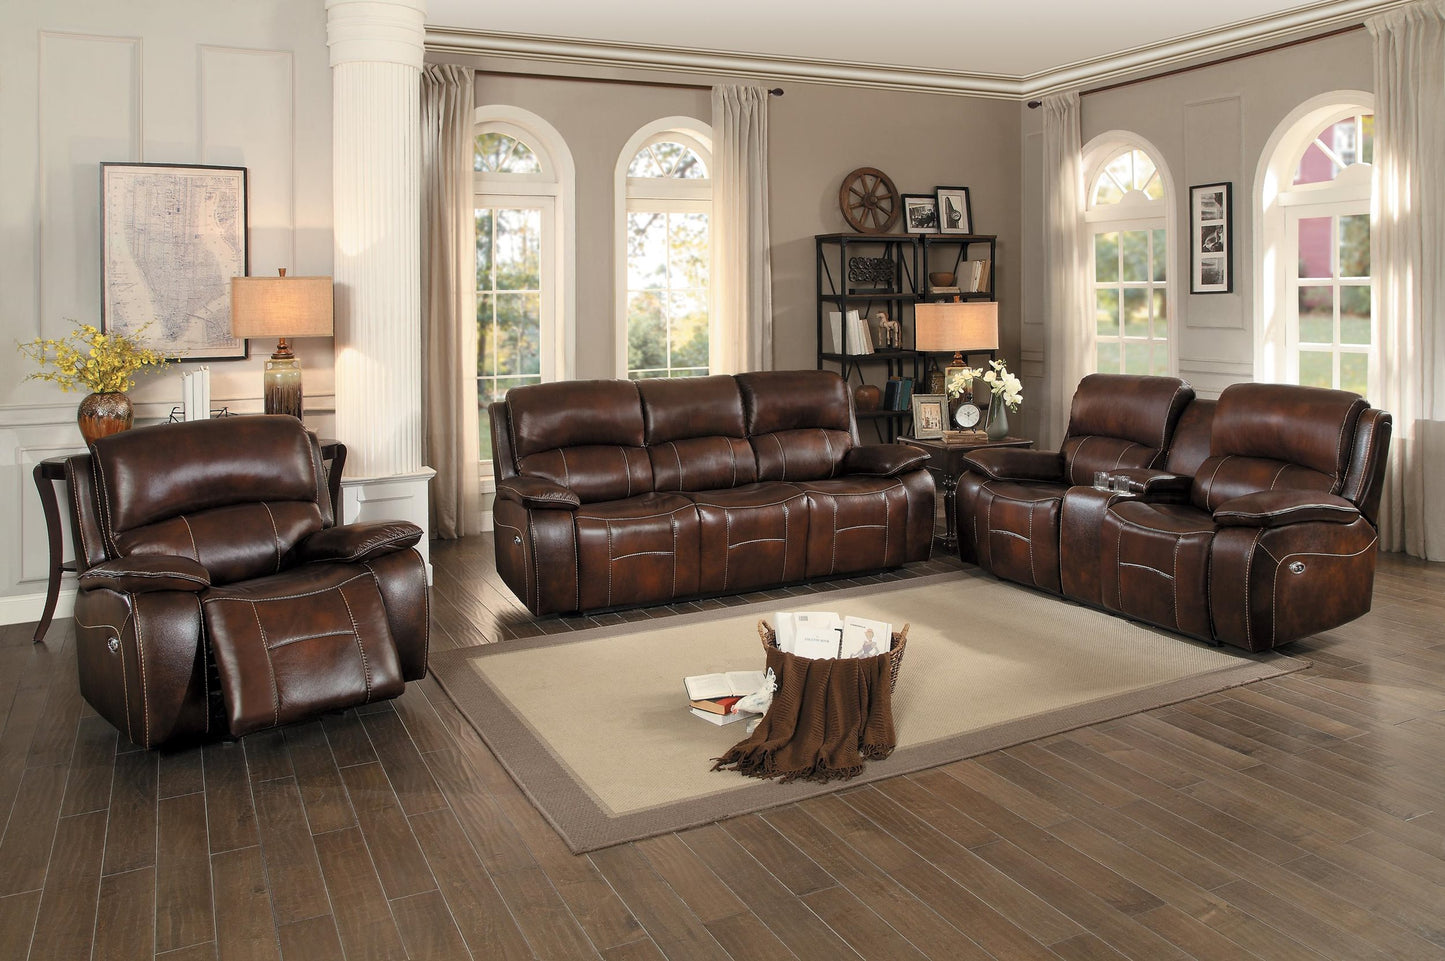 Homelegance Mahala Power Double Reclining Love Seat in Brown Top Grain Leather